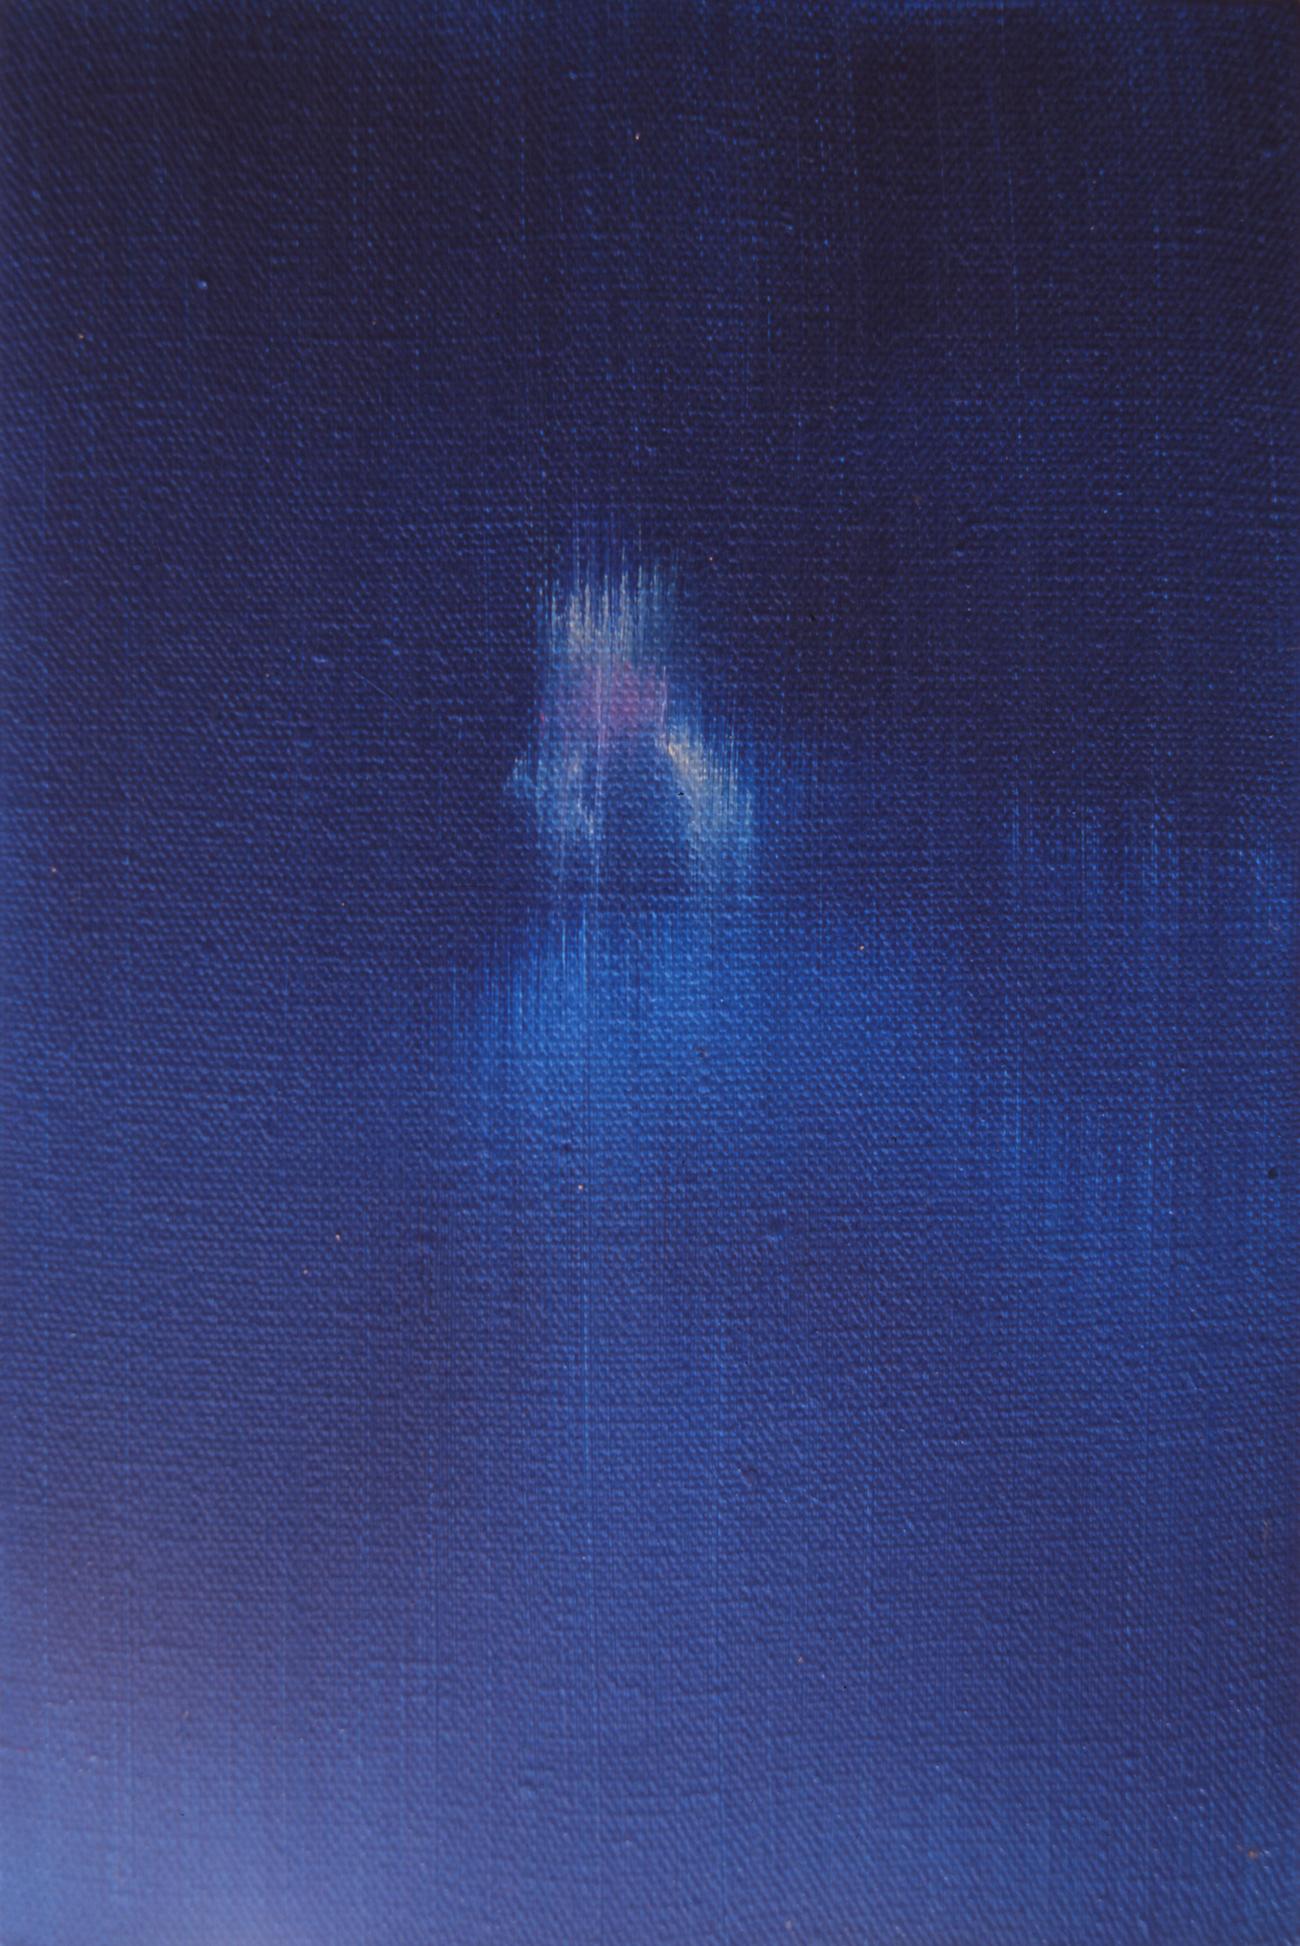 textured Figurative painting- Water Series No.3 by He Wenjue 
Dimension : 30 x 20cm 
Material :oil on canvas 
Date: 2009 

About Water Series 
He Wenjue grew up in Hunan province, China, where the tributaries of the Xiangjiang River surround almost